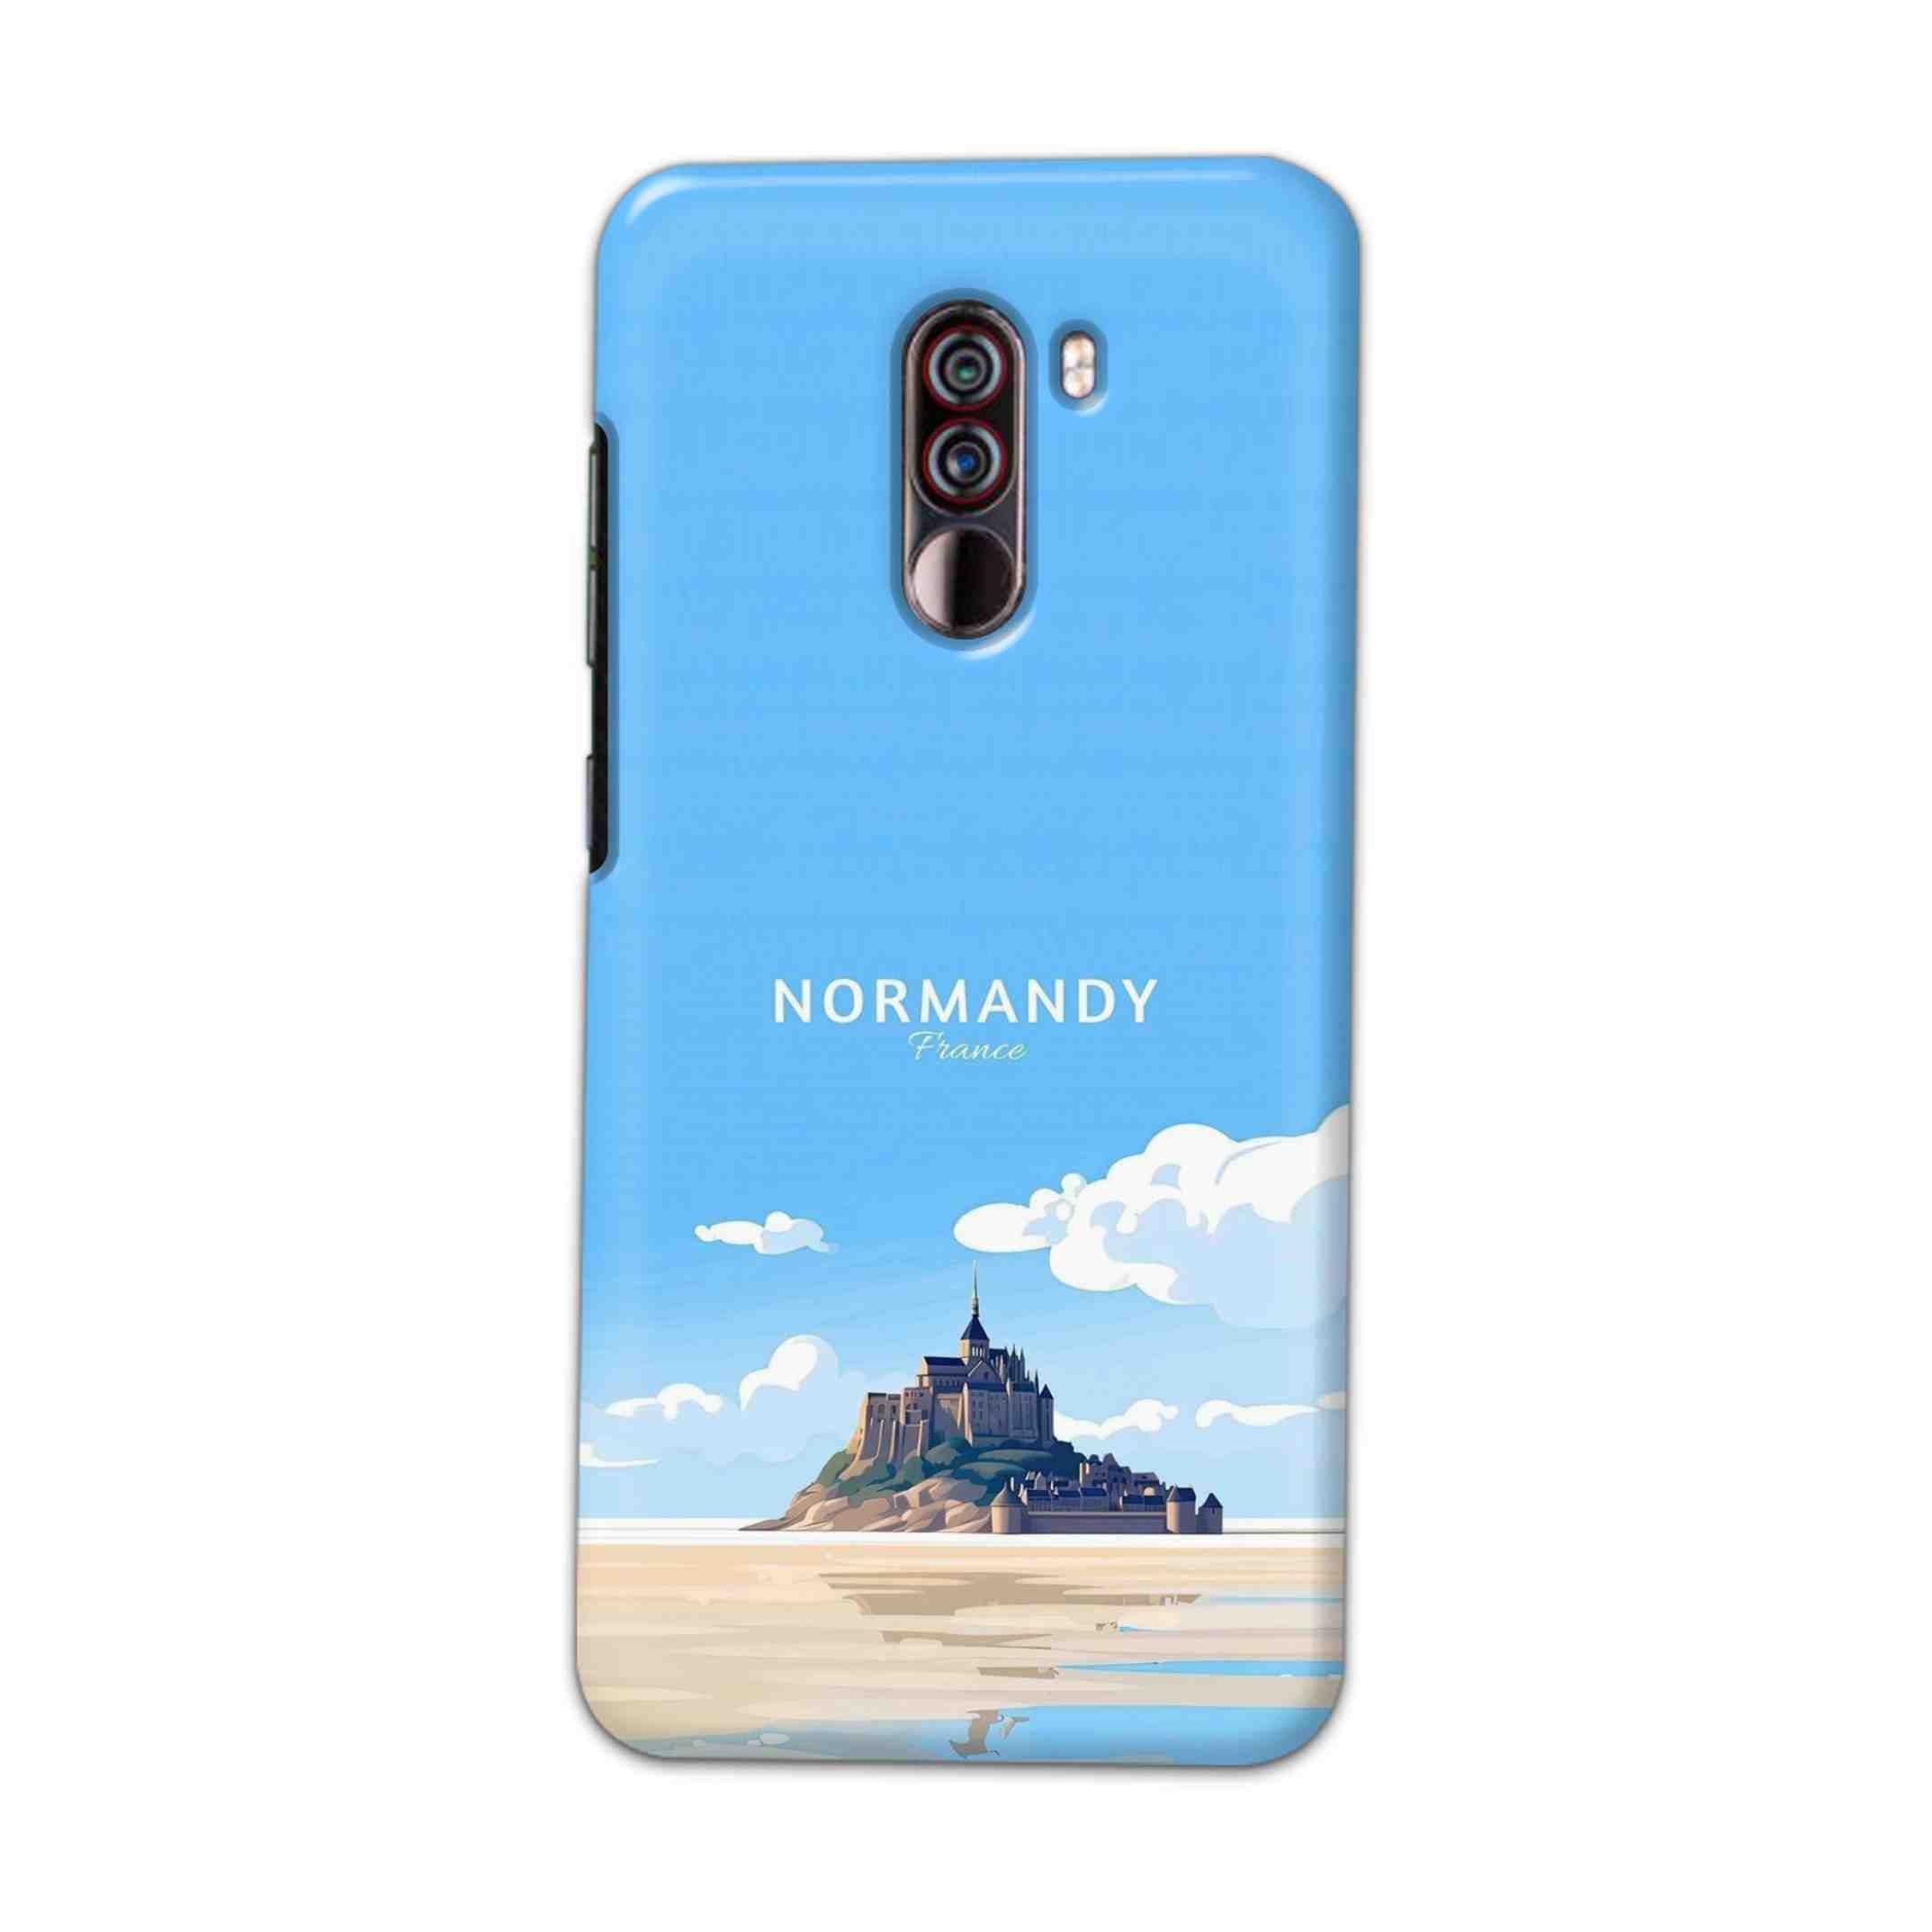 Buy Normandy Hard Back Mobile Phone Case Cover For Xiaomi Pocophone F1 Online